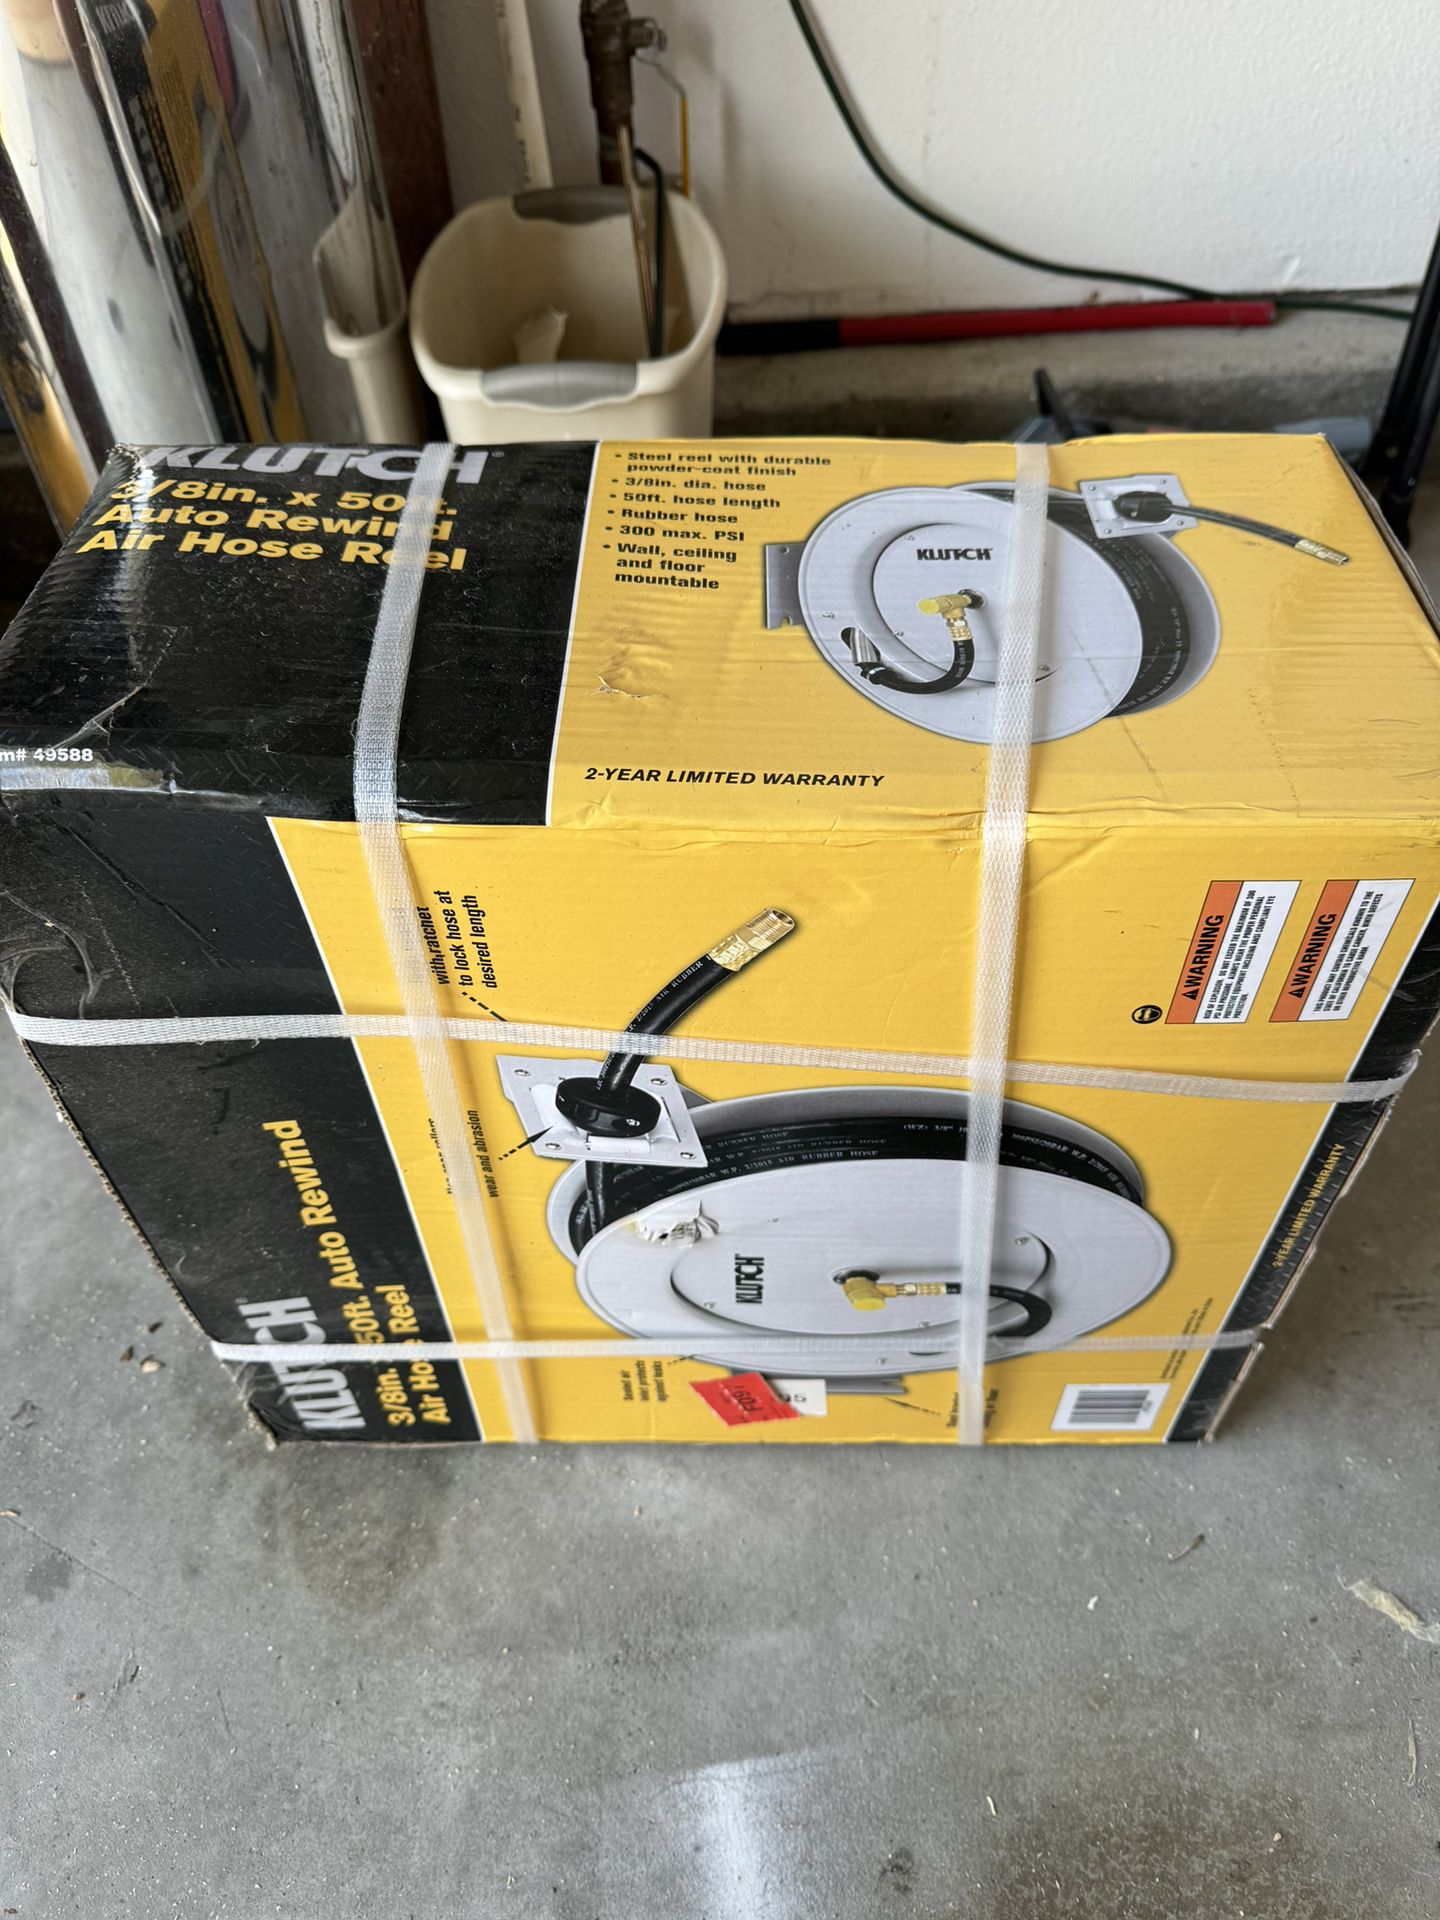 Air Hose Reel for Sale in San Diego, CA - OfferUp